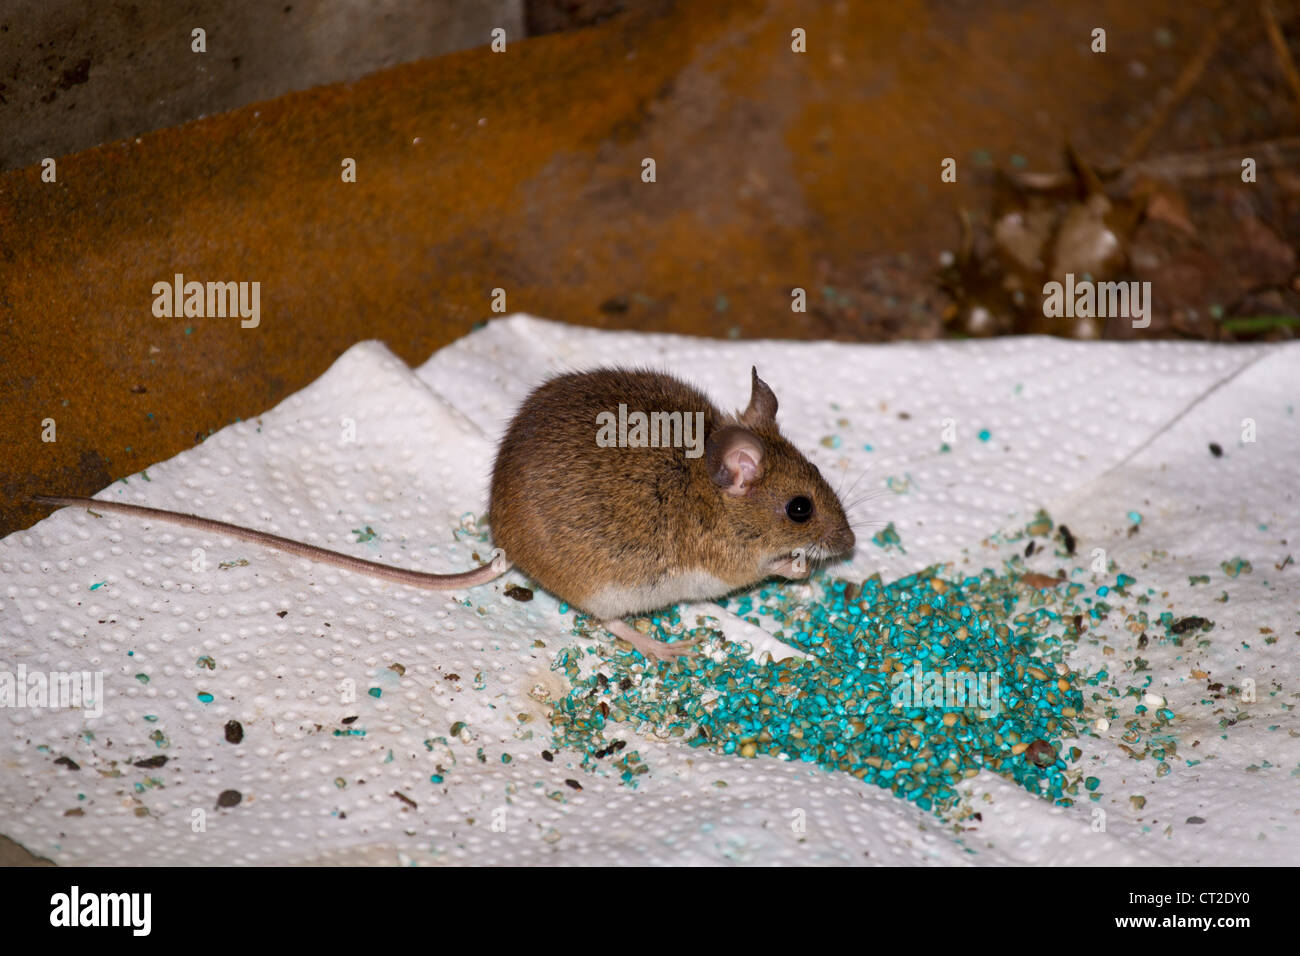 A mouse eating poison bait. Stock Photo